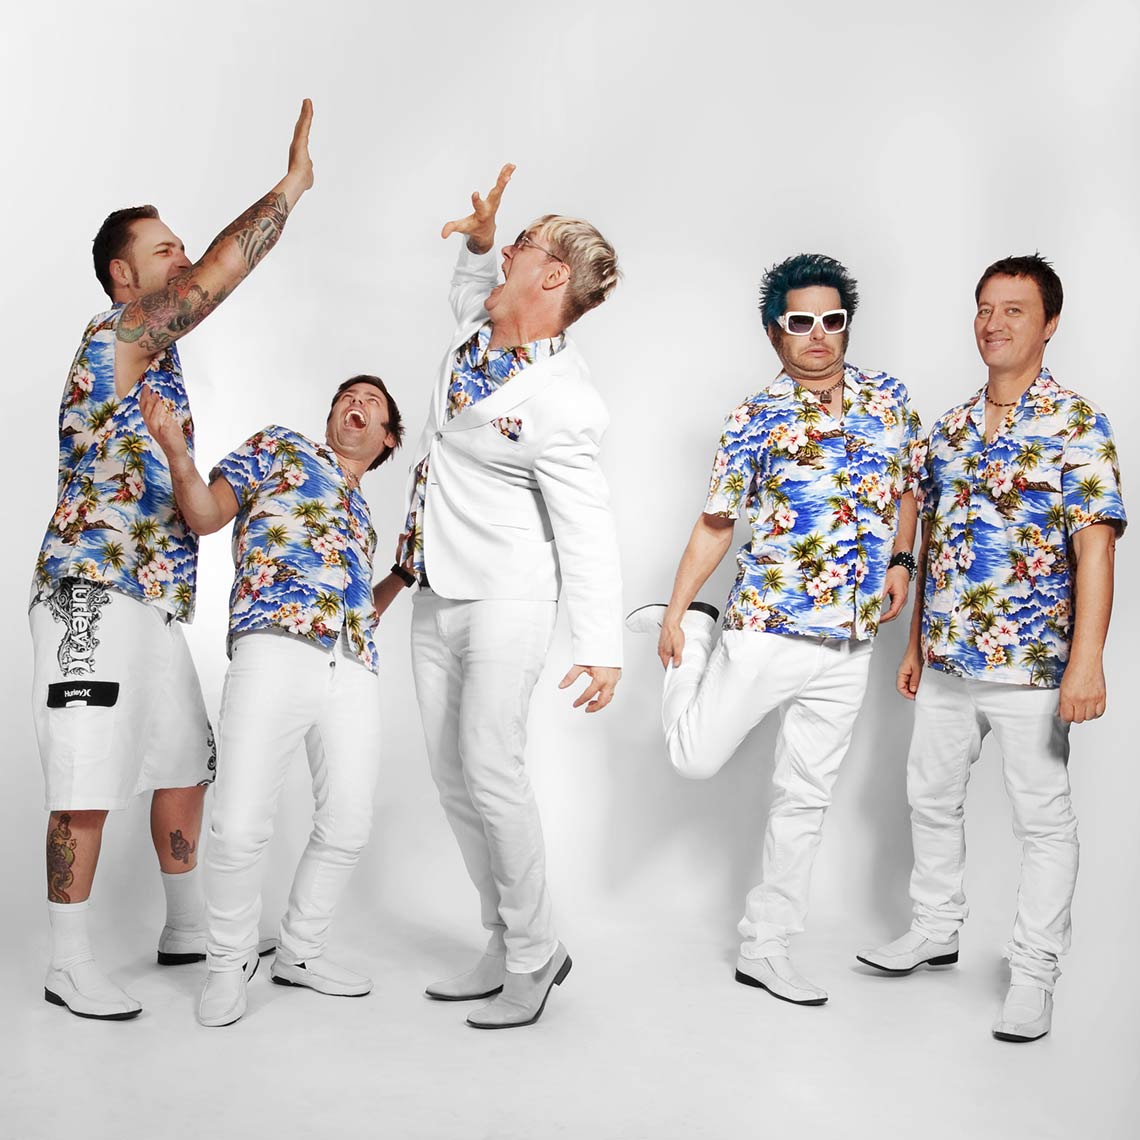 Me First and the Gimme Gimmes by Carrie Schechter for FatWreckchords